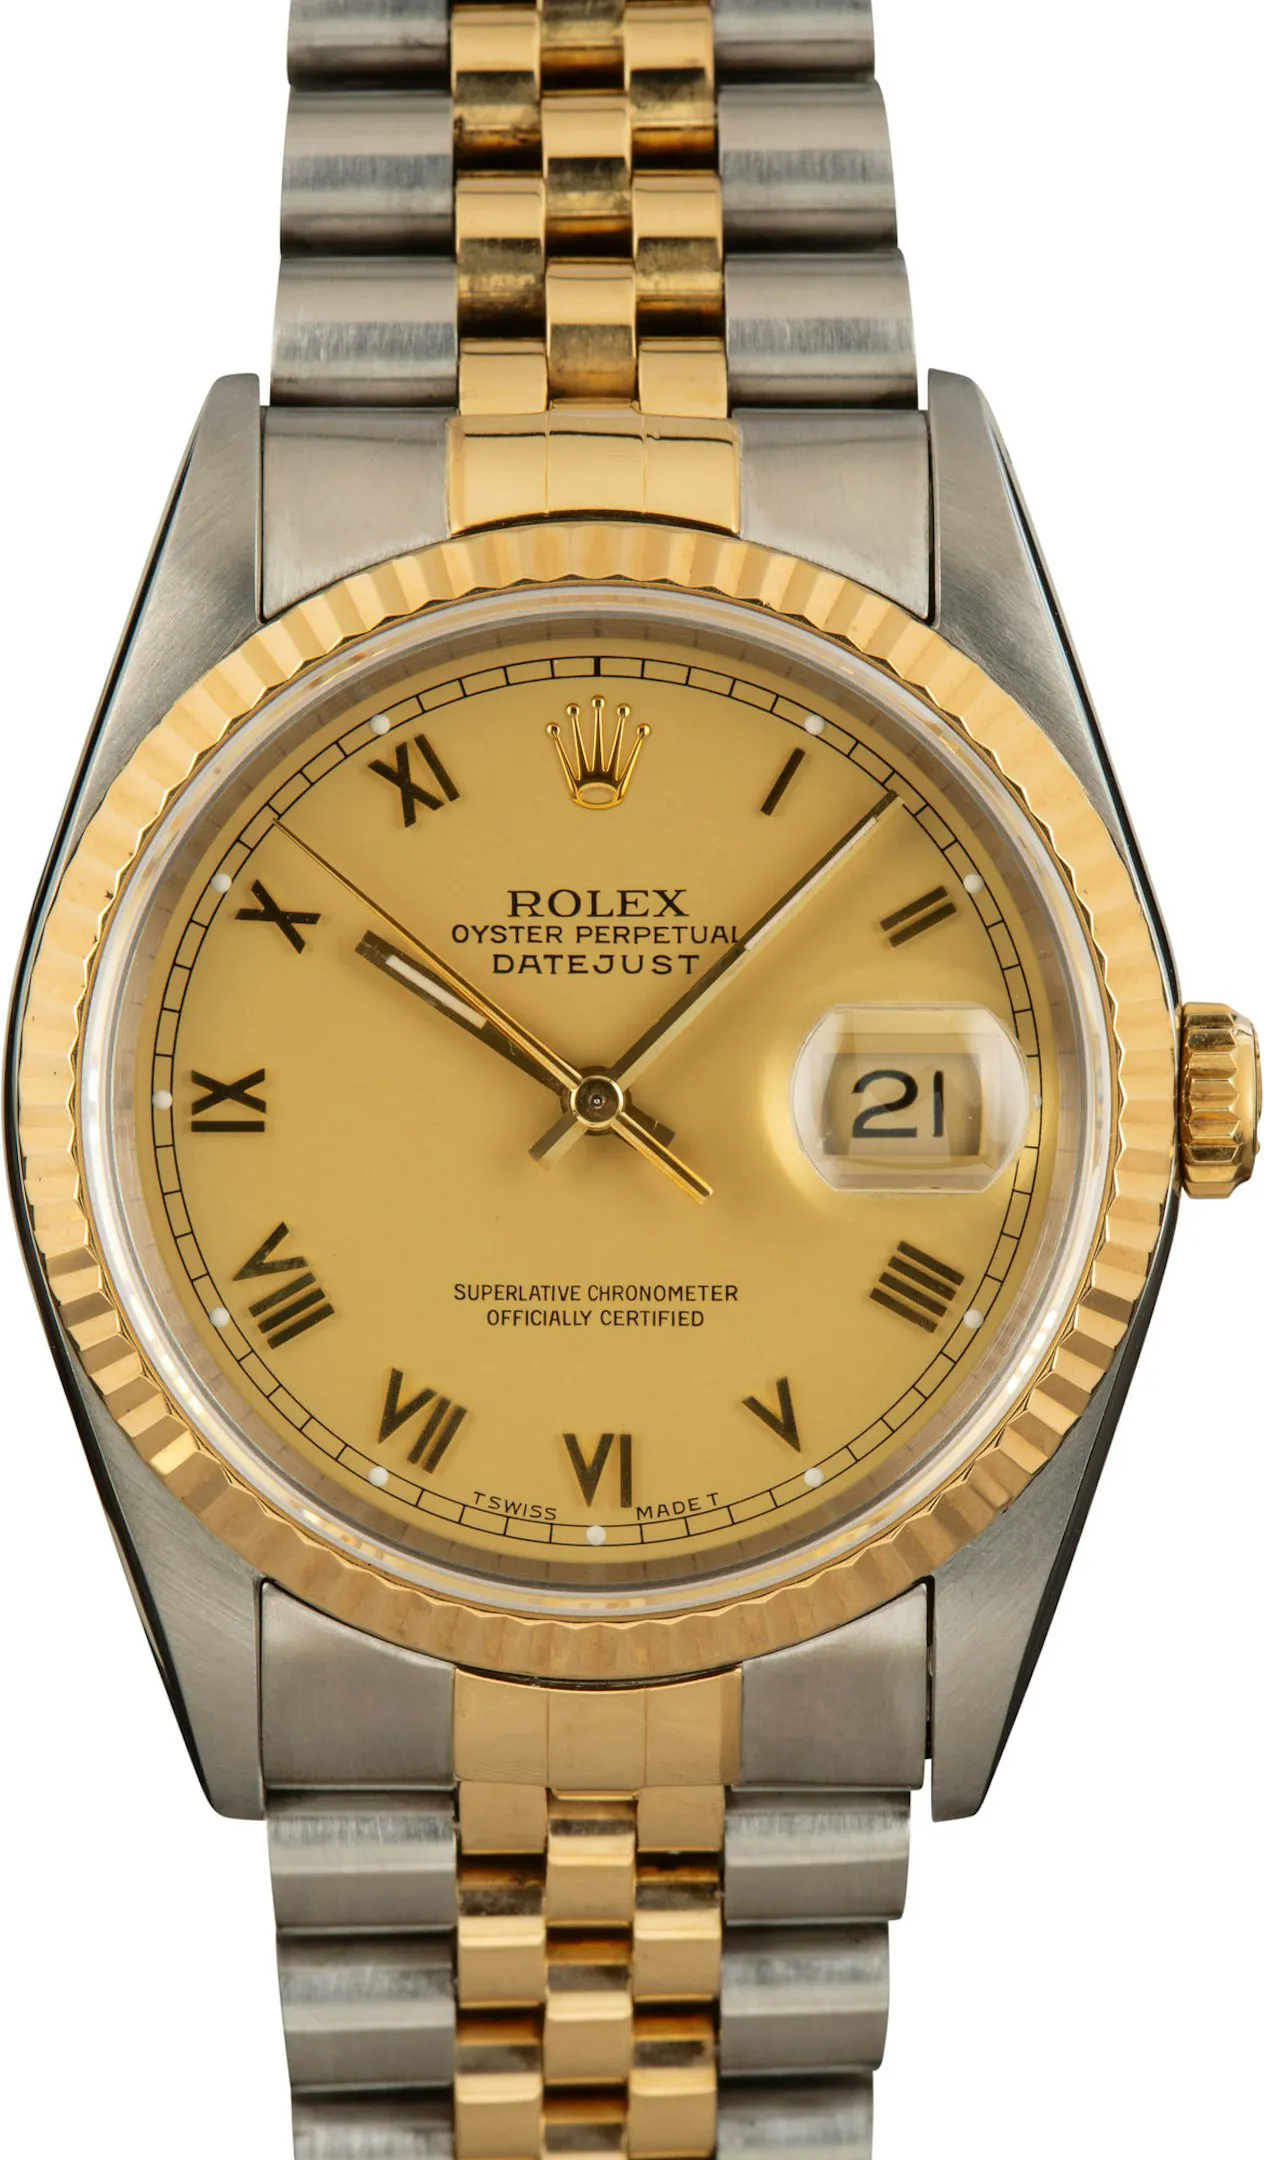 Rolex Datejust 16233 36mm Stainless steel Champagne